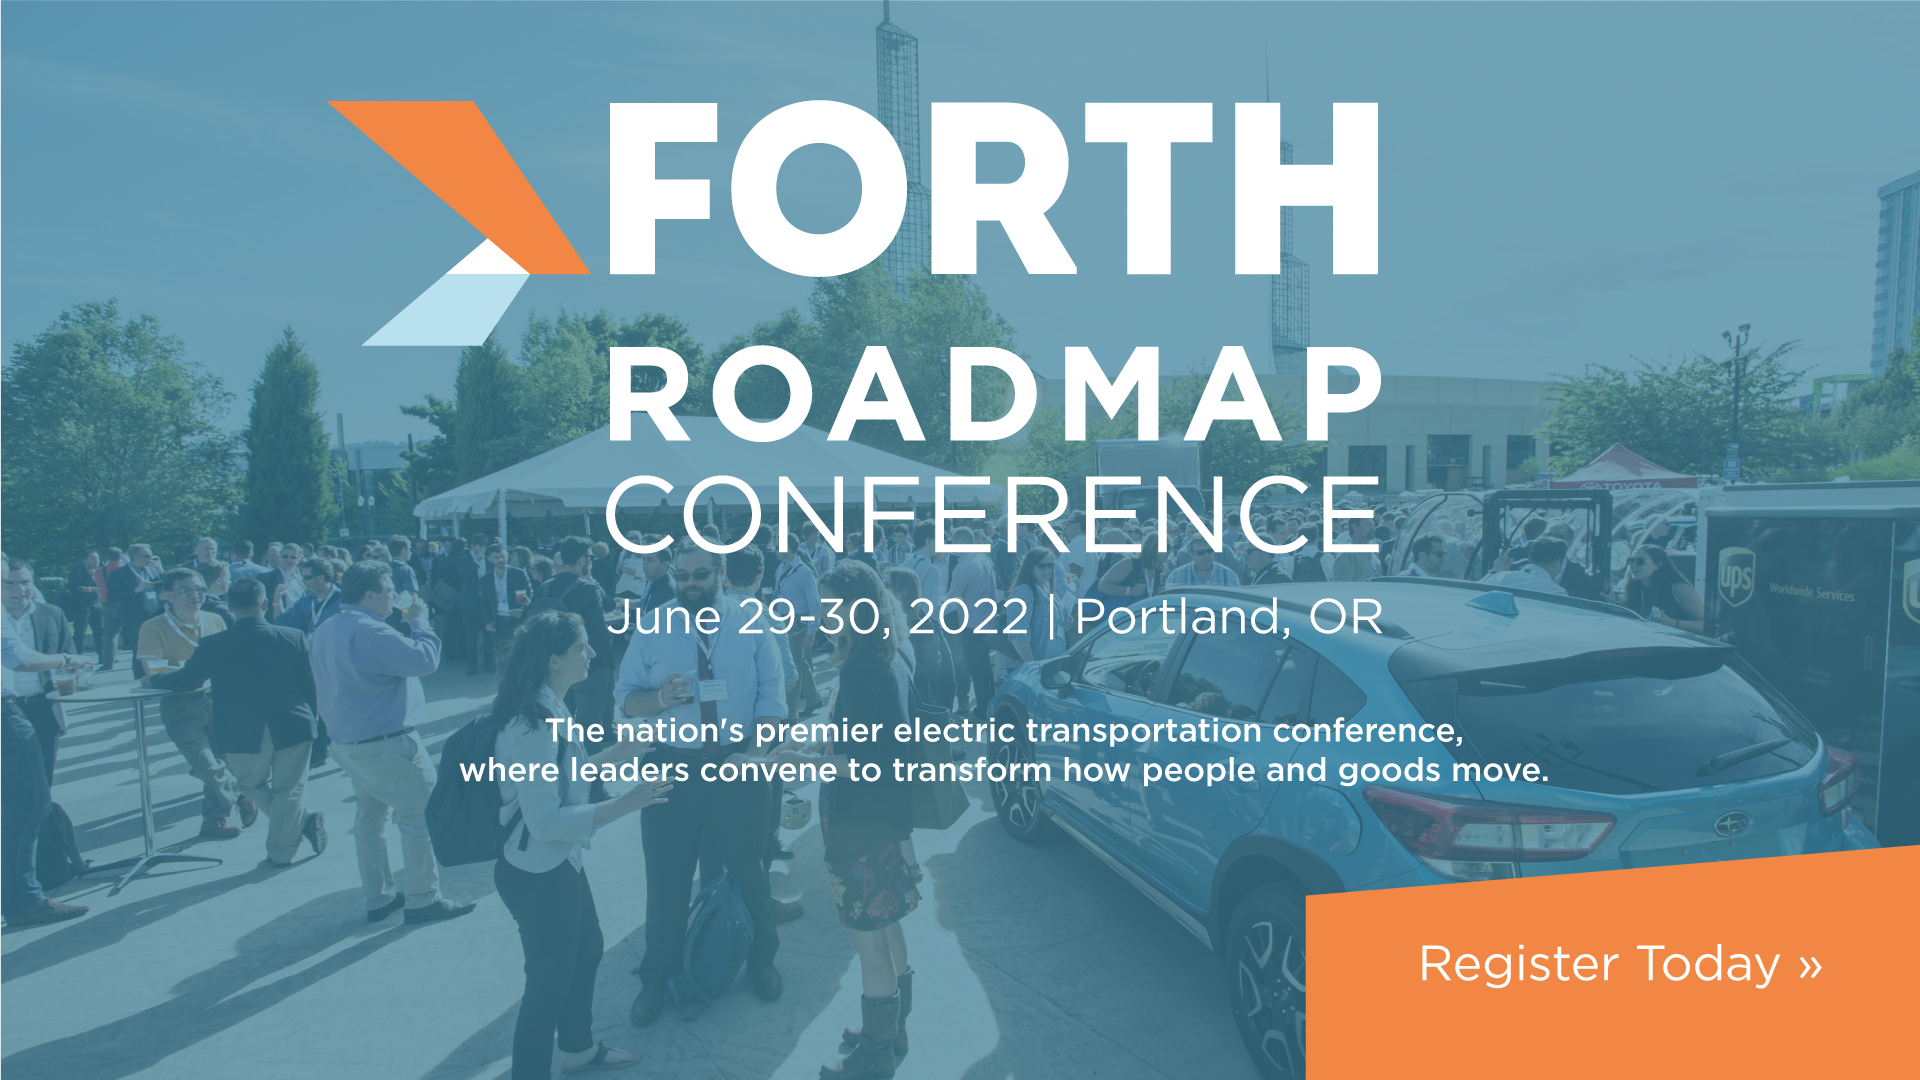 forth roadmap conference June 29-30, 2022